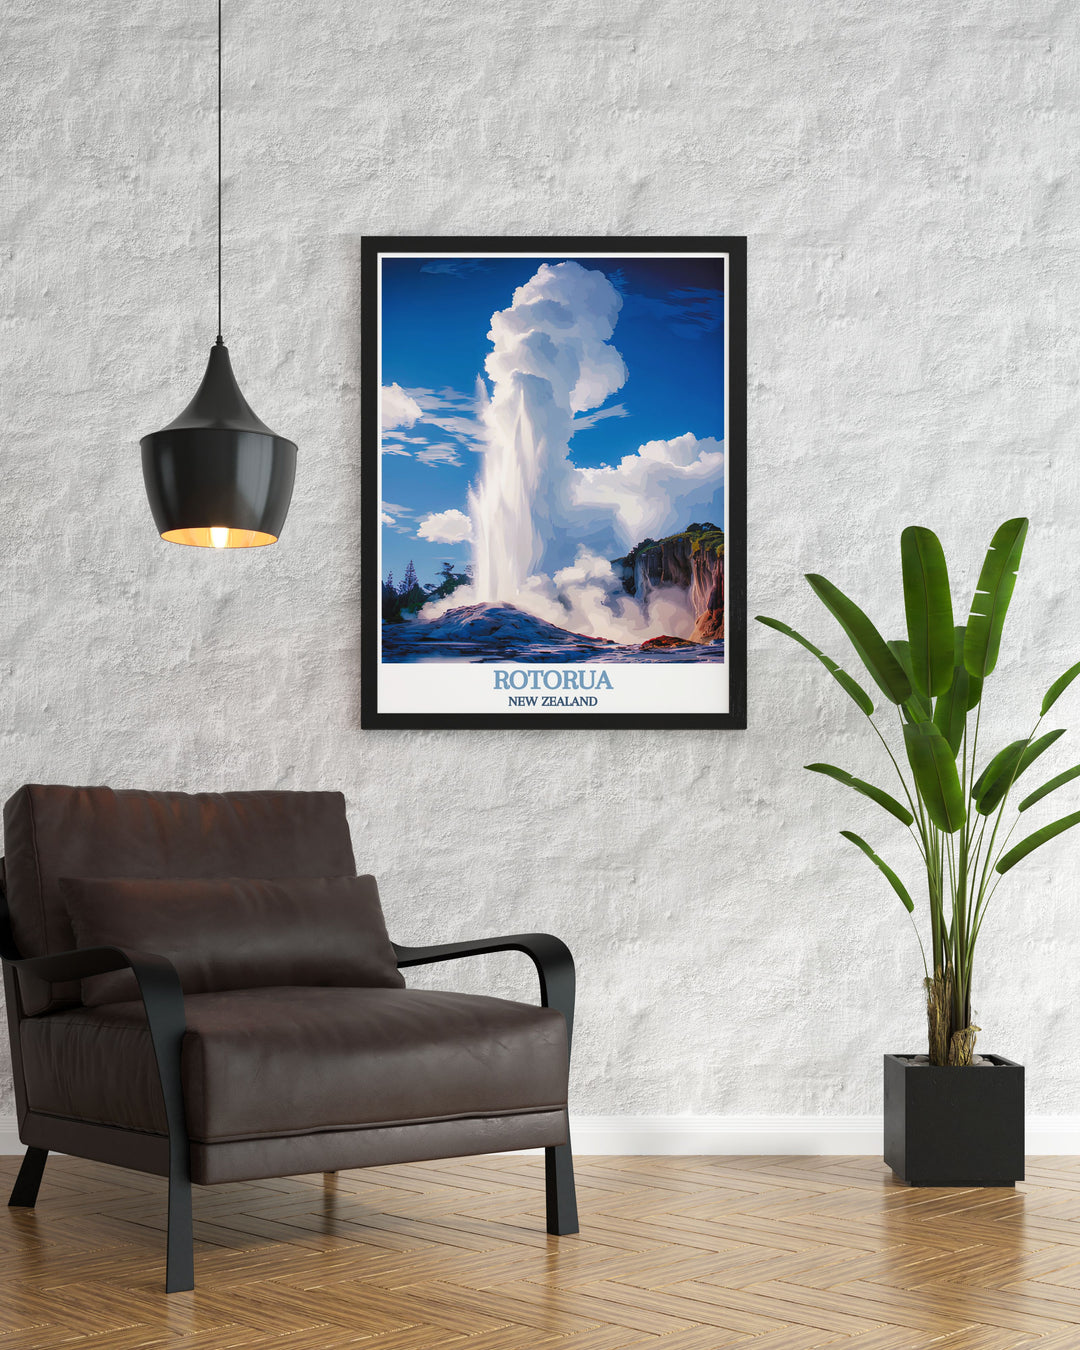 Te Puia poster featuring a detailed and vibrant depiction of the geothermal wonders and Maori heritage in Rotorua New Zealand. A must have for anyone who loves travel and natural landscapes. This poster brings the beauty of Te Puia into your home or office.